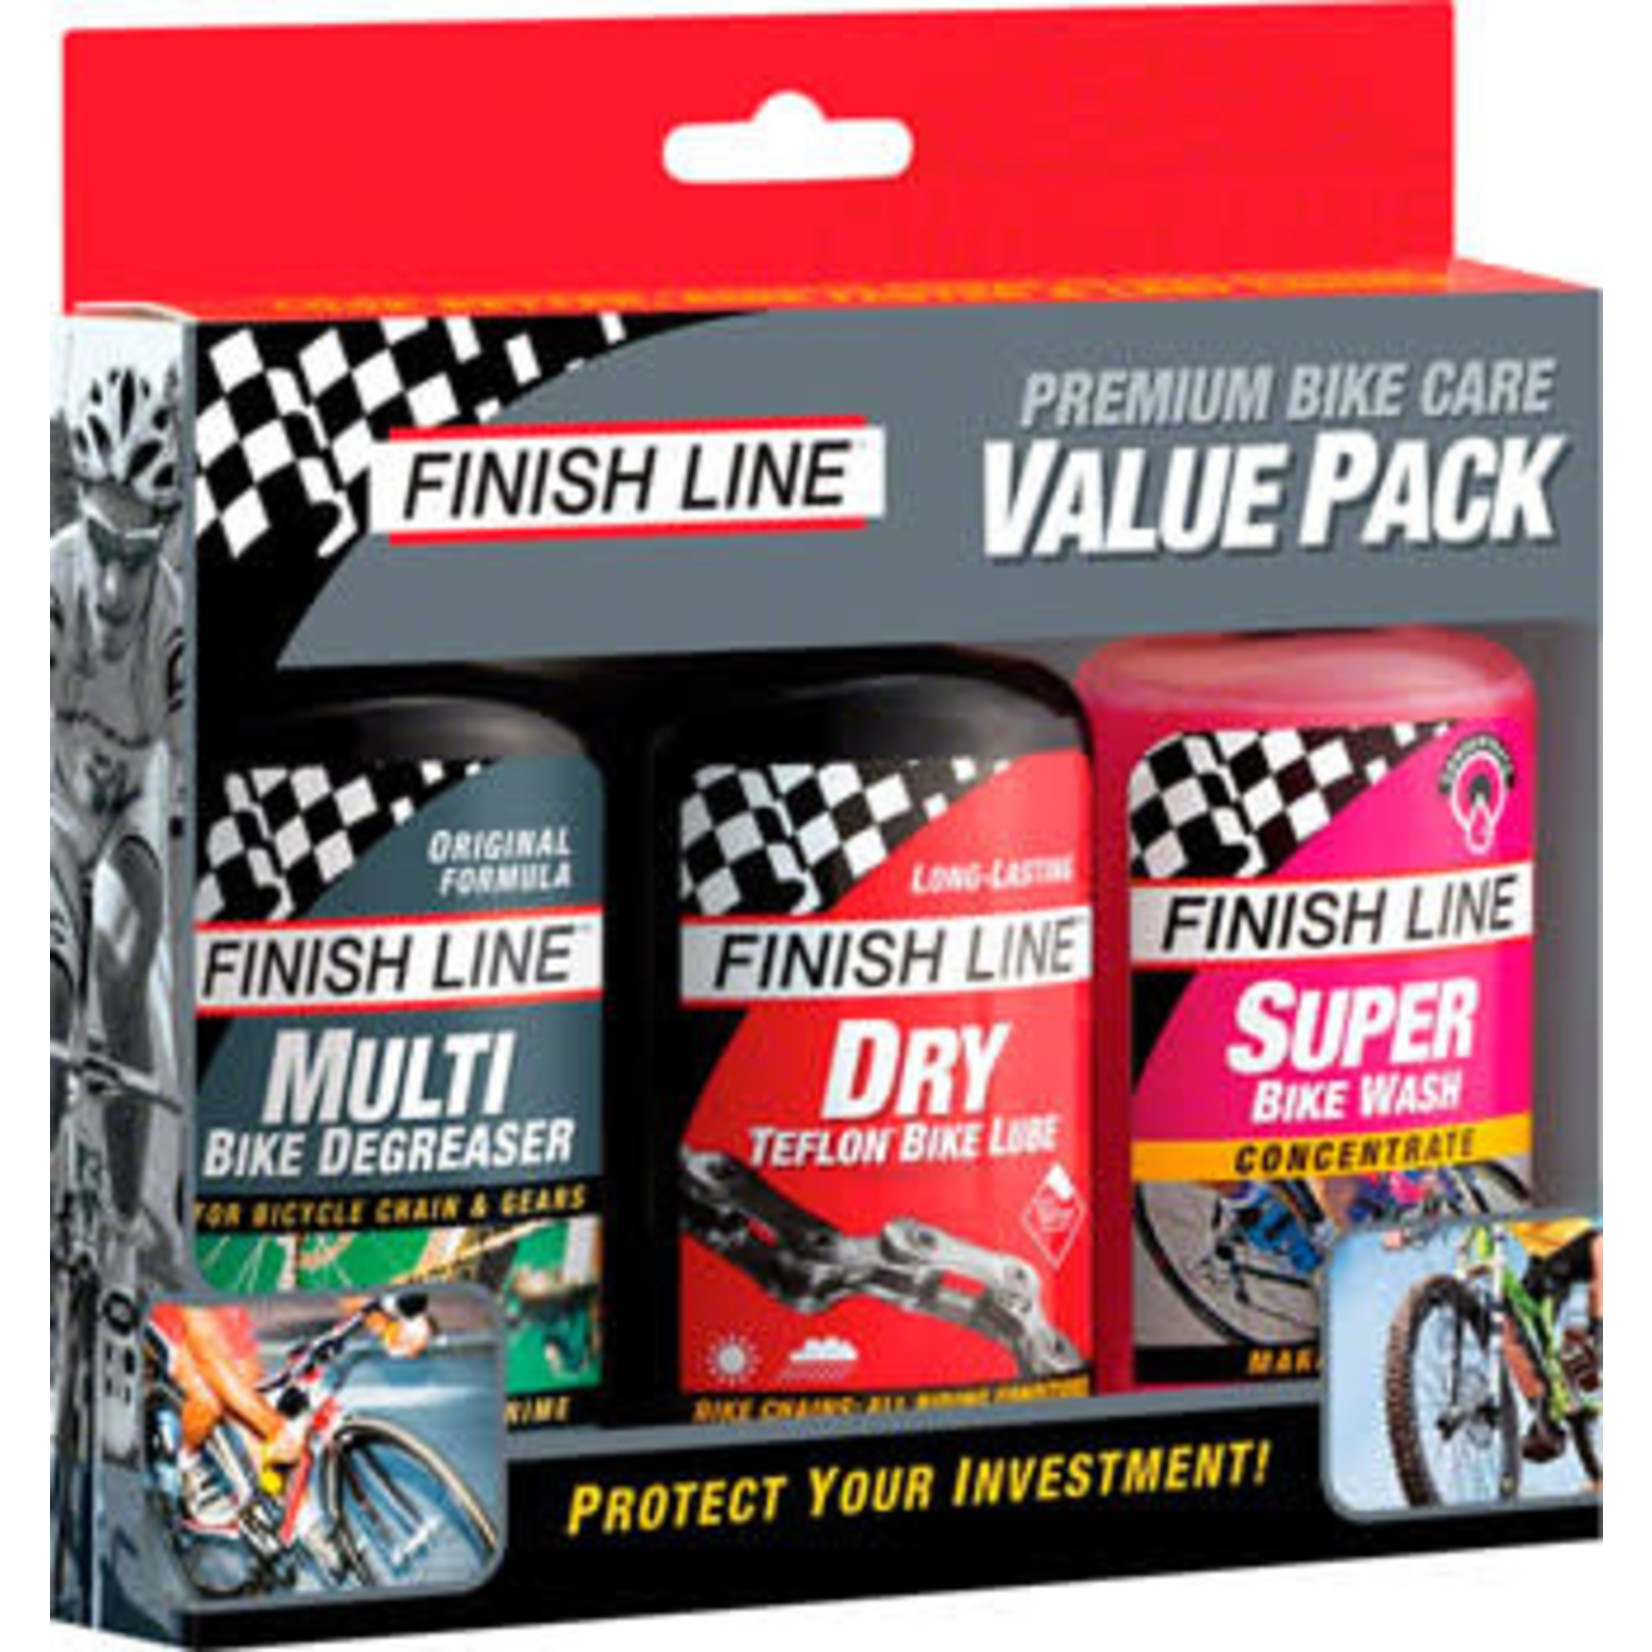 Finish Line Finish Line Bike Care Value Pack, Includes DRY Chain Lubricant, EcoTech Degreaser and Super Bike Wash Cleaner